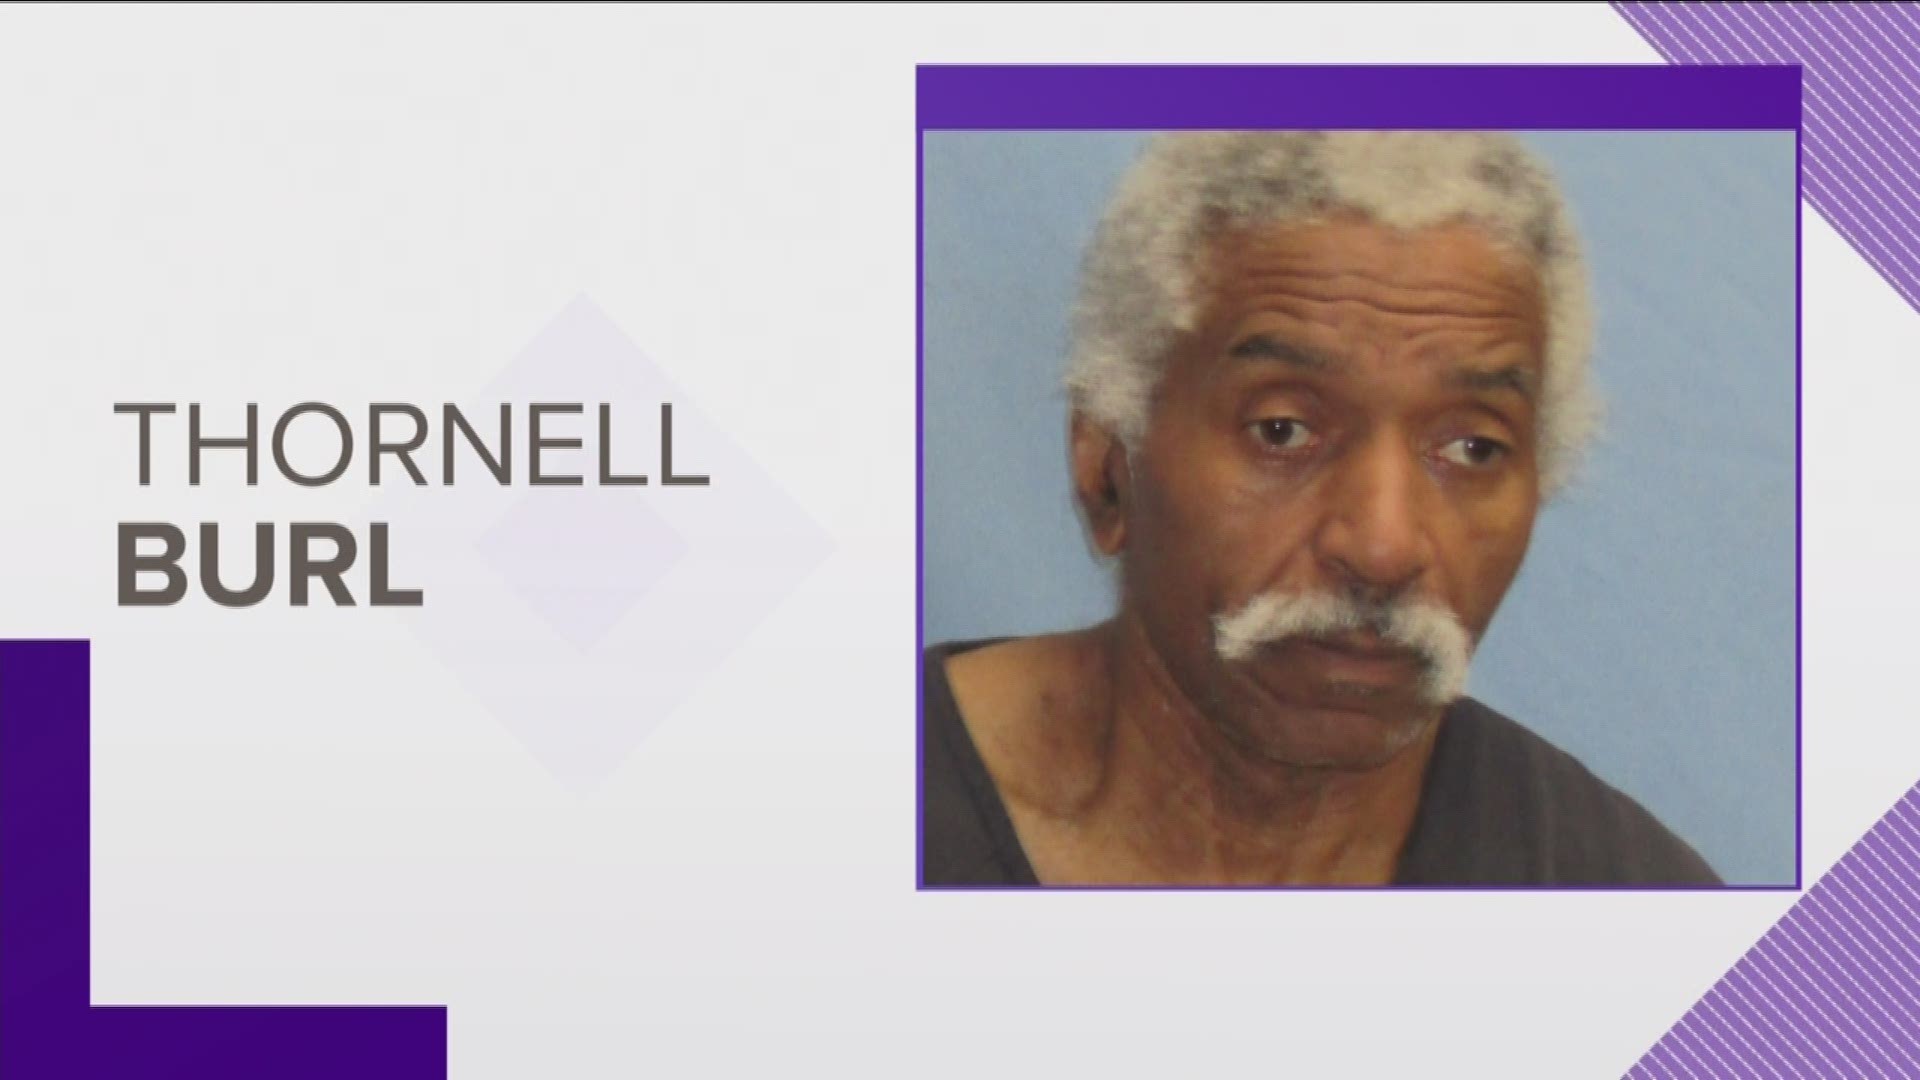 Thornell Burl, 64, faces a murder charge after a man was stabbed to death.